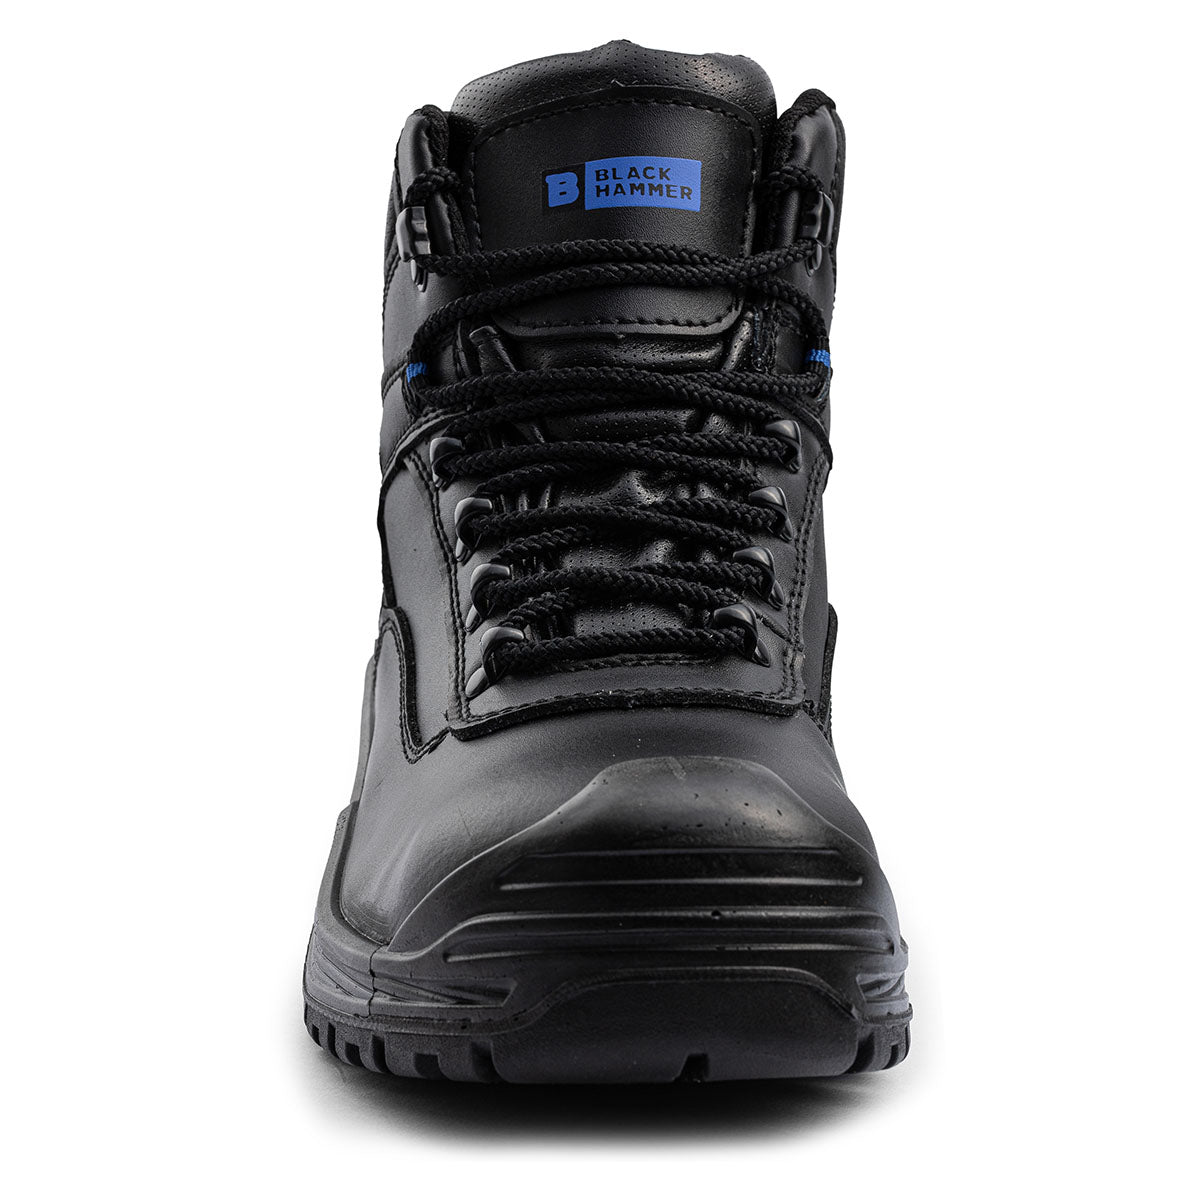 Steel Toe Cap Safety Shoes